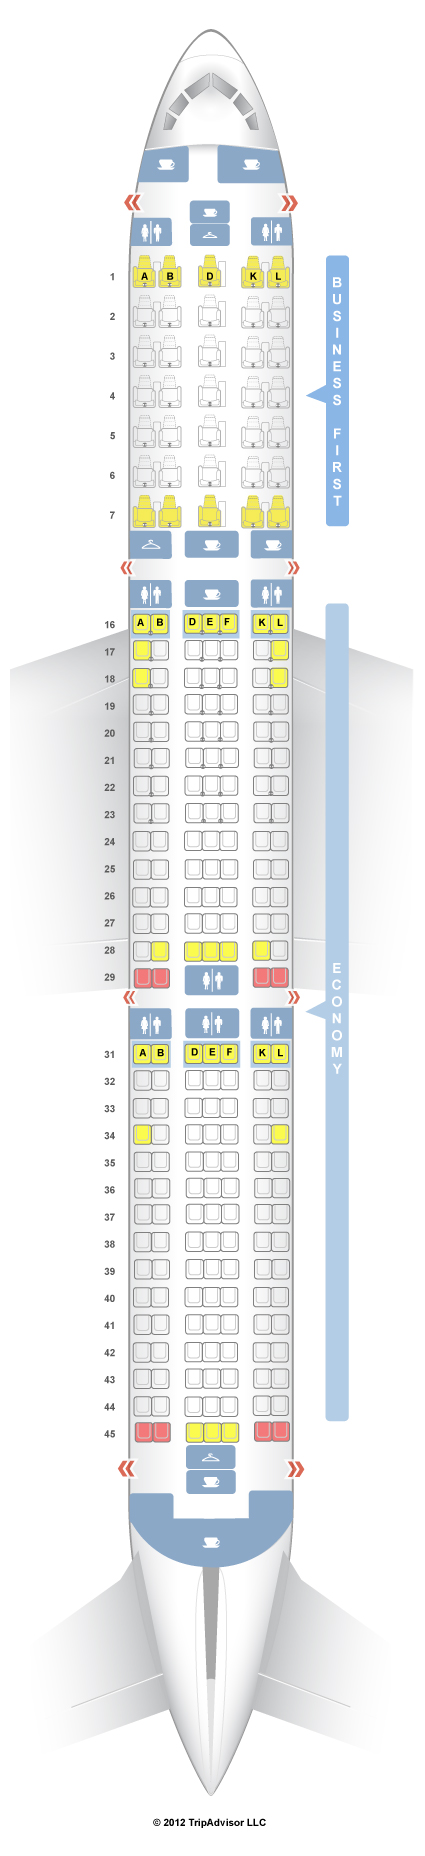 united airlines seat 35f